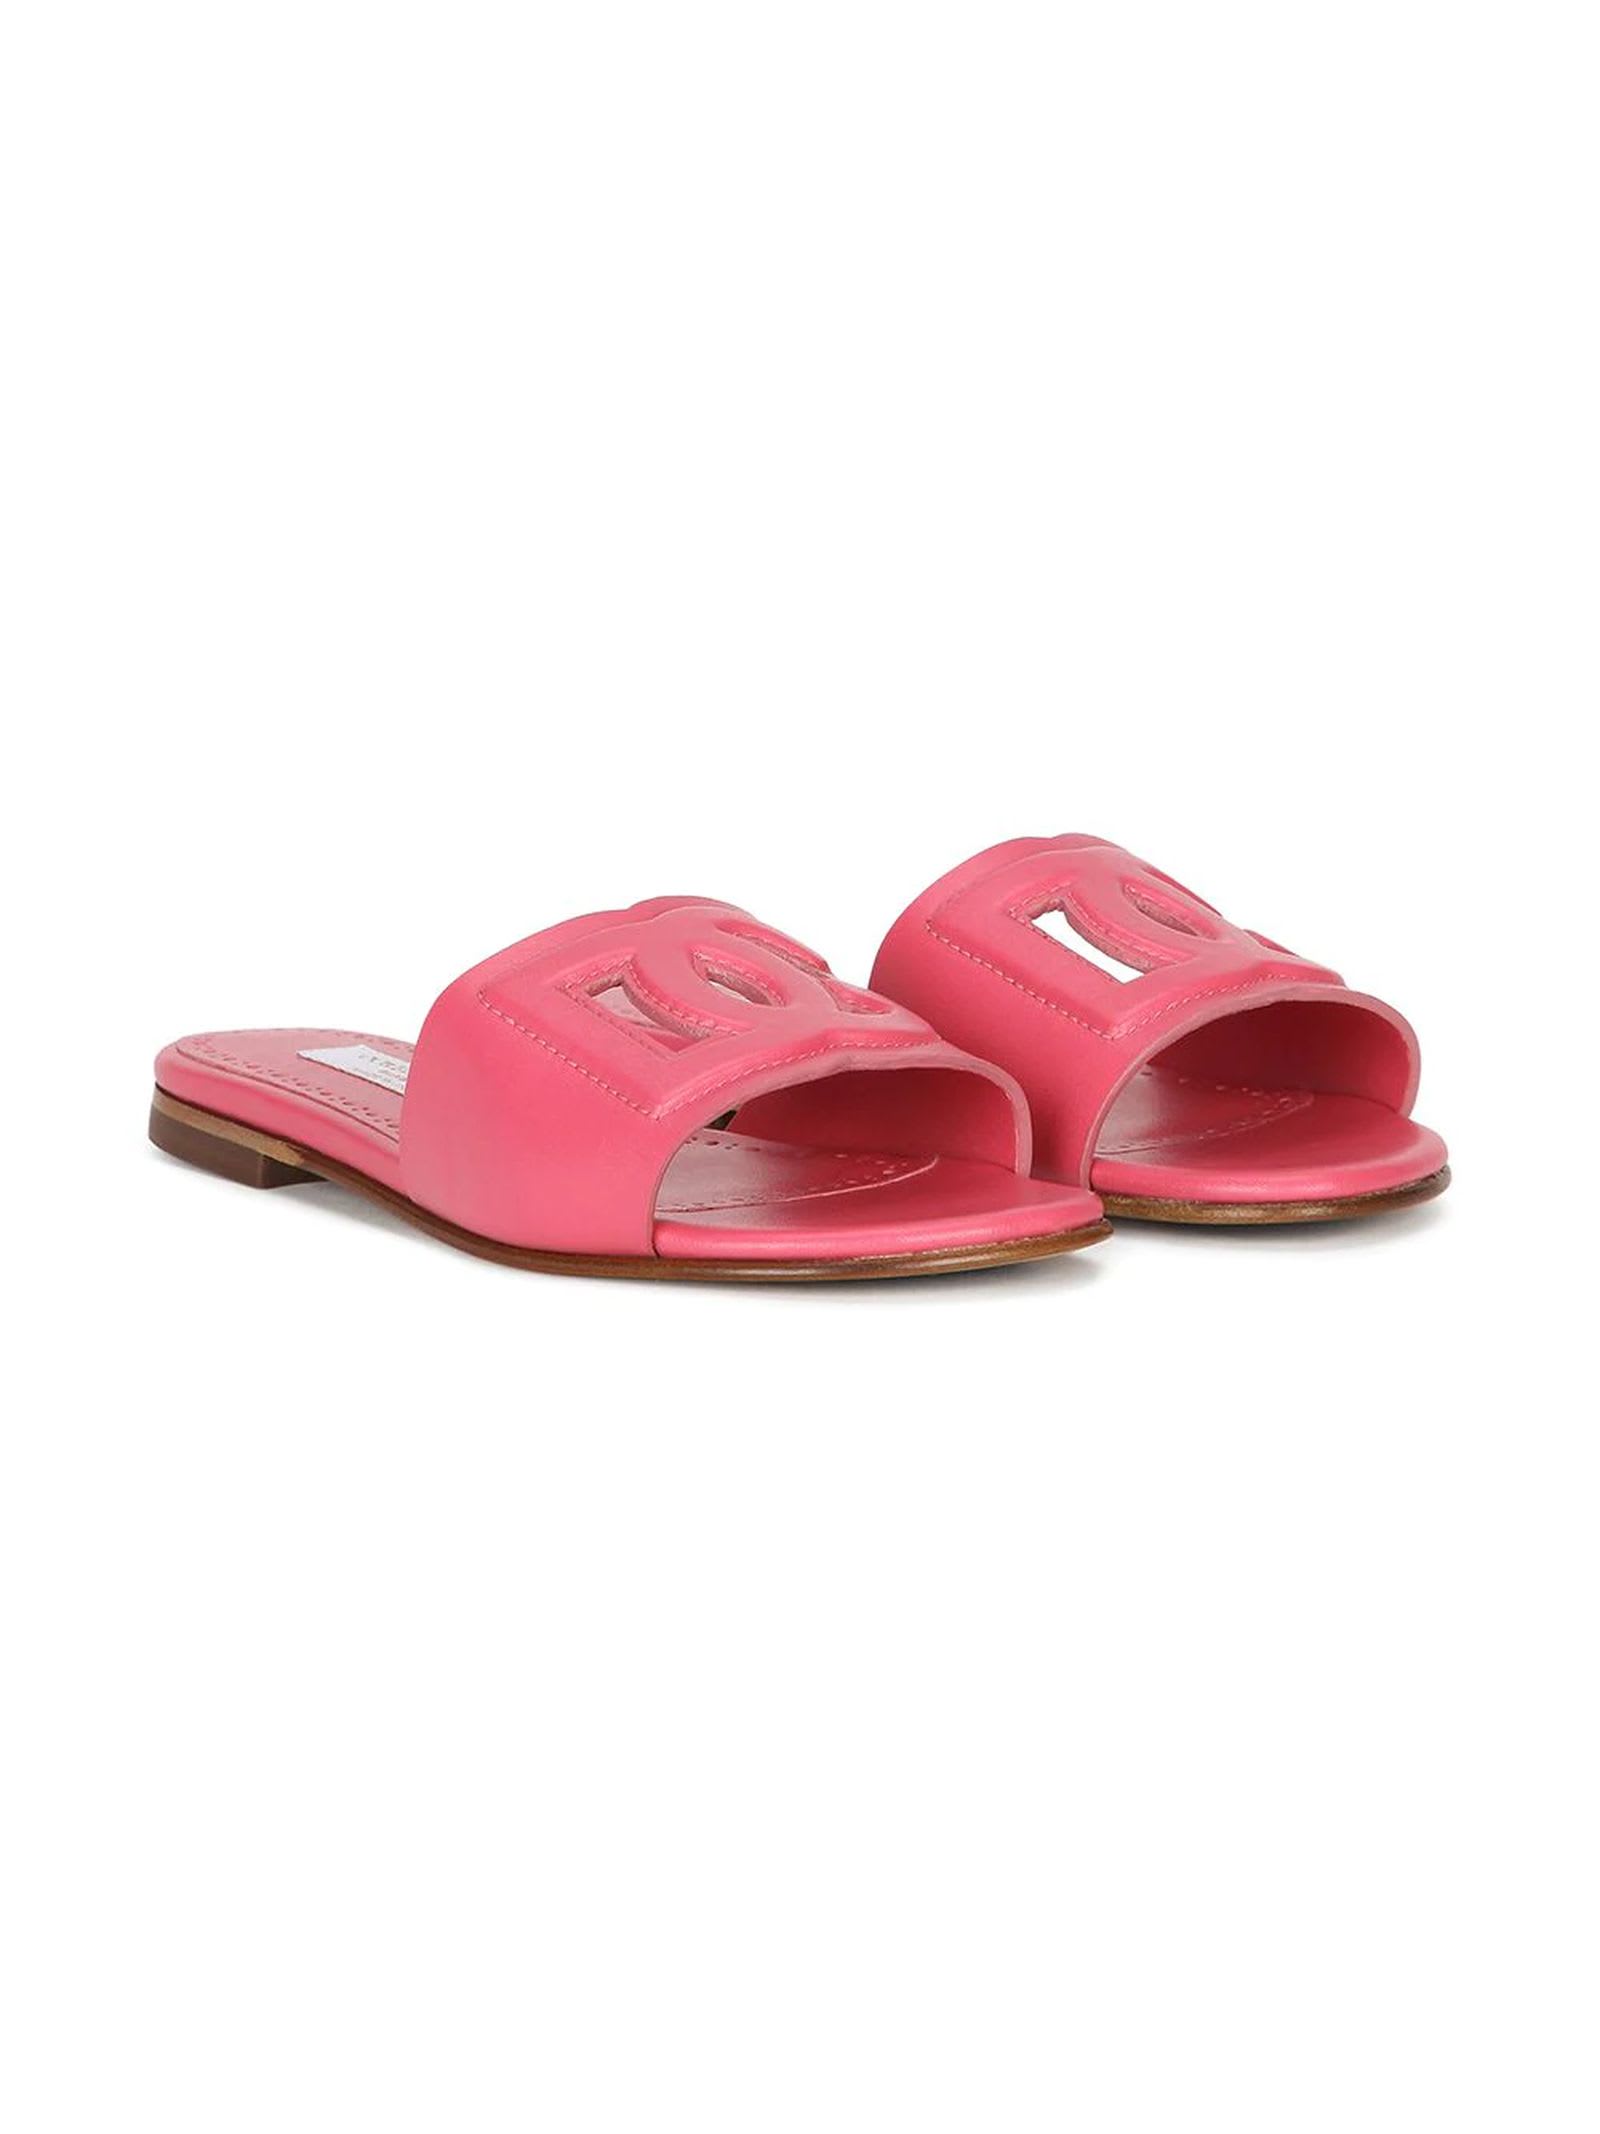 DOLCE & GABBANA PINK LEATHER SANDALS